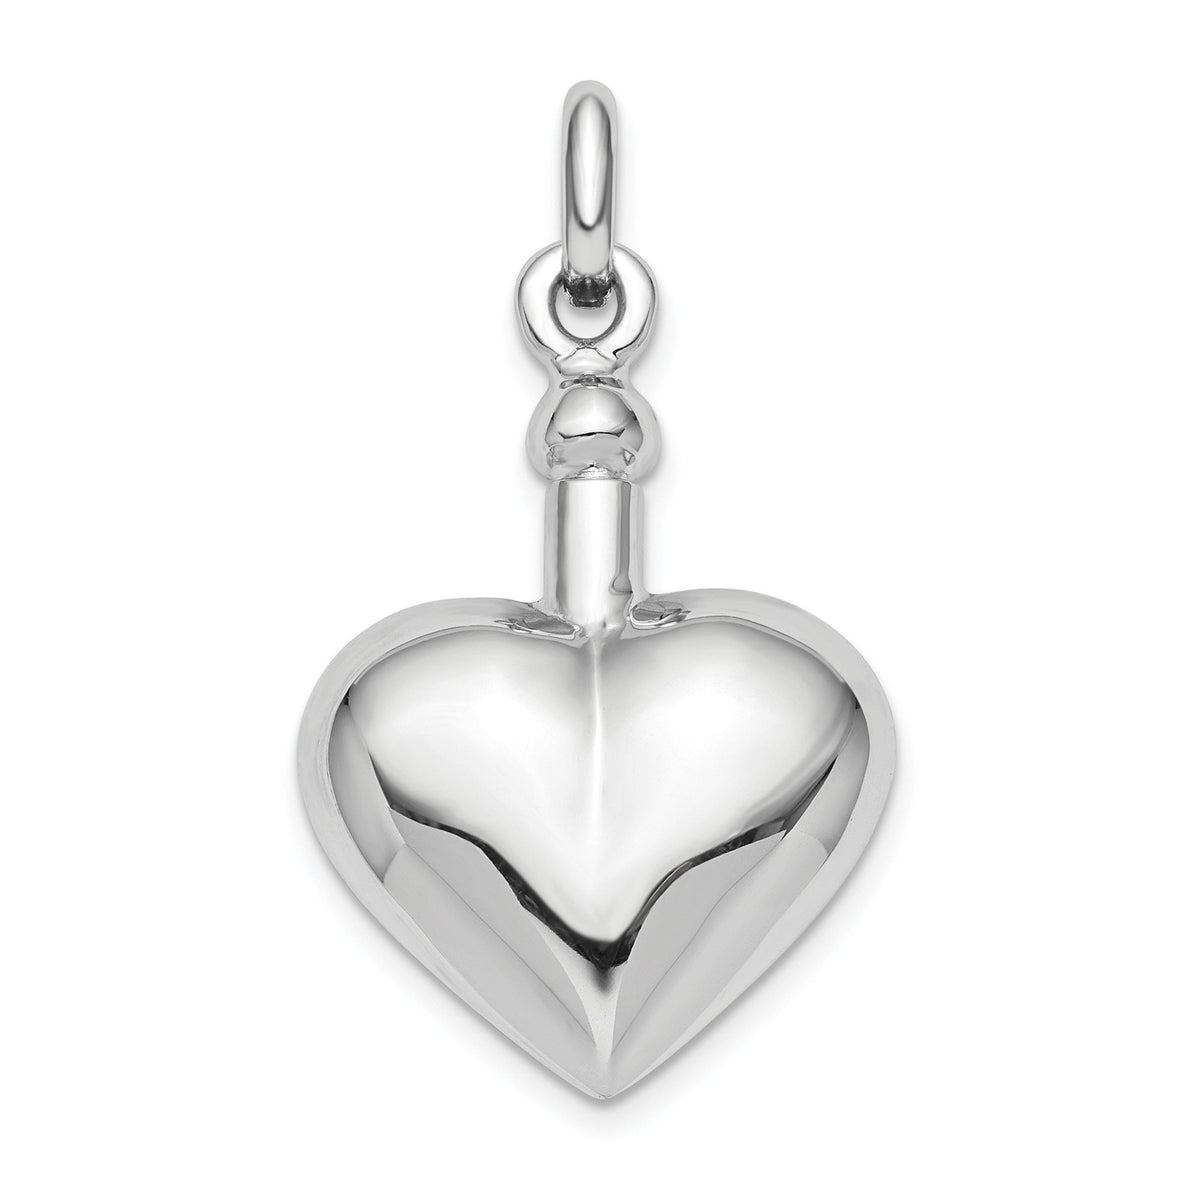 Sterling Silver Polished Screw Top Heart Ash Holder Pendant Human Ashes or Pet Ashes - Gift Box Included